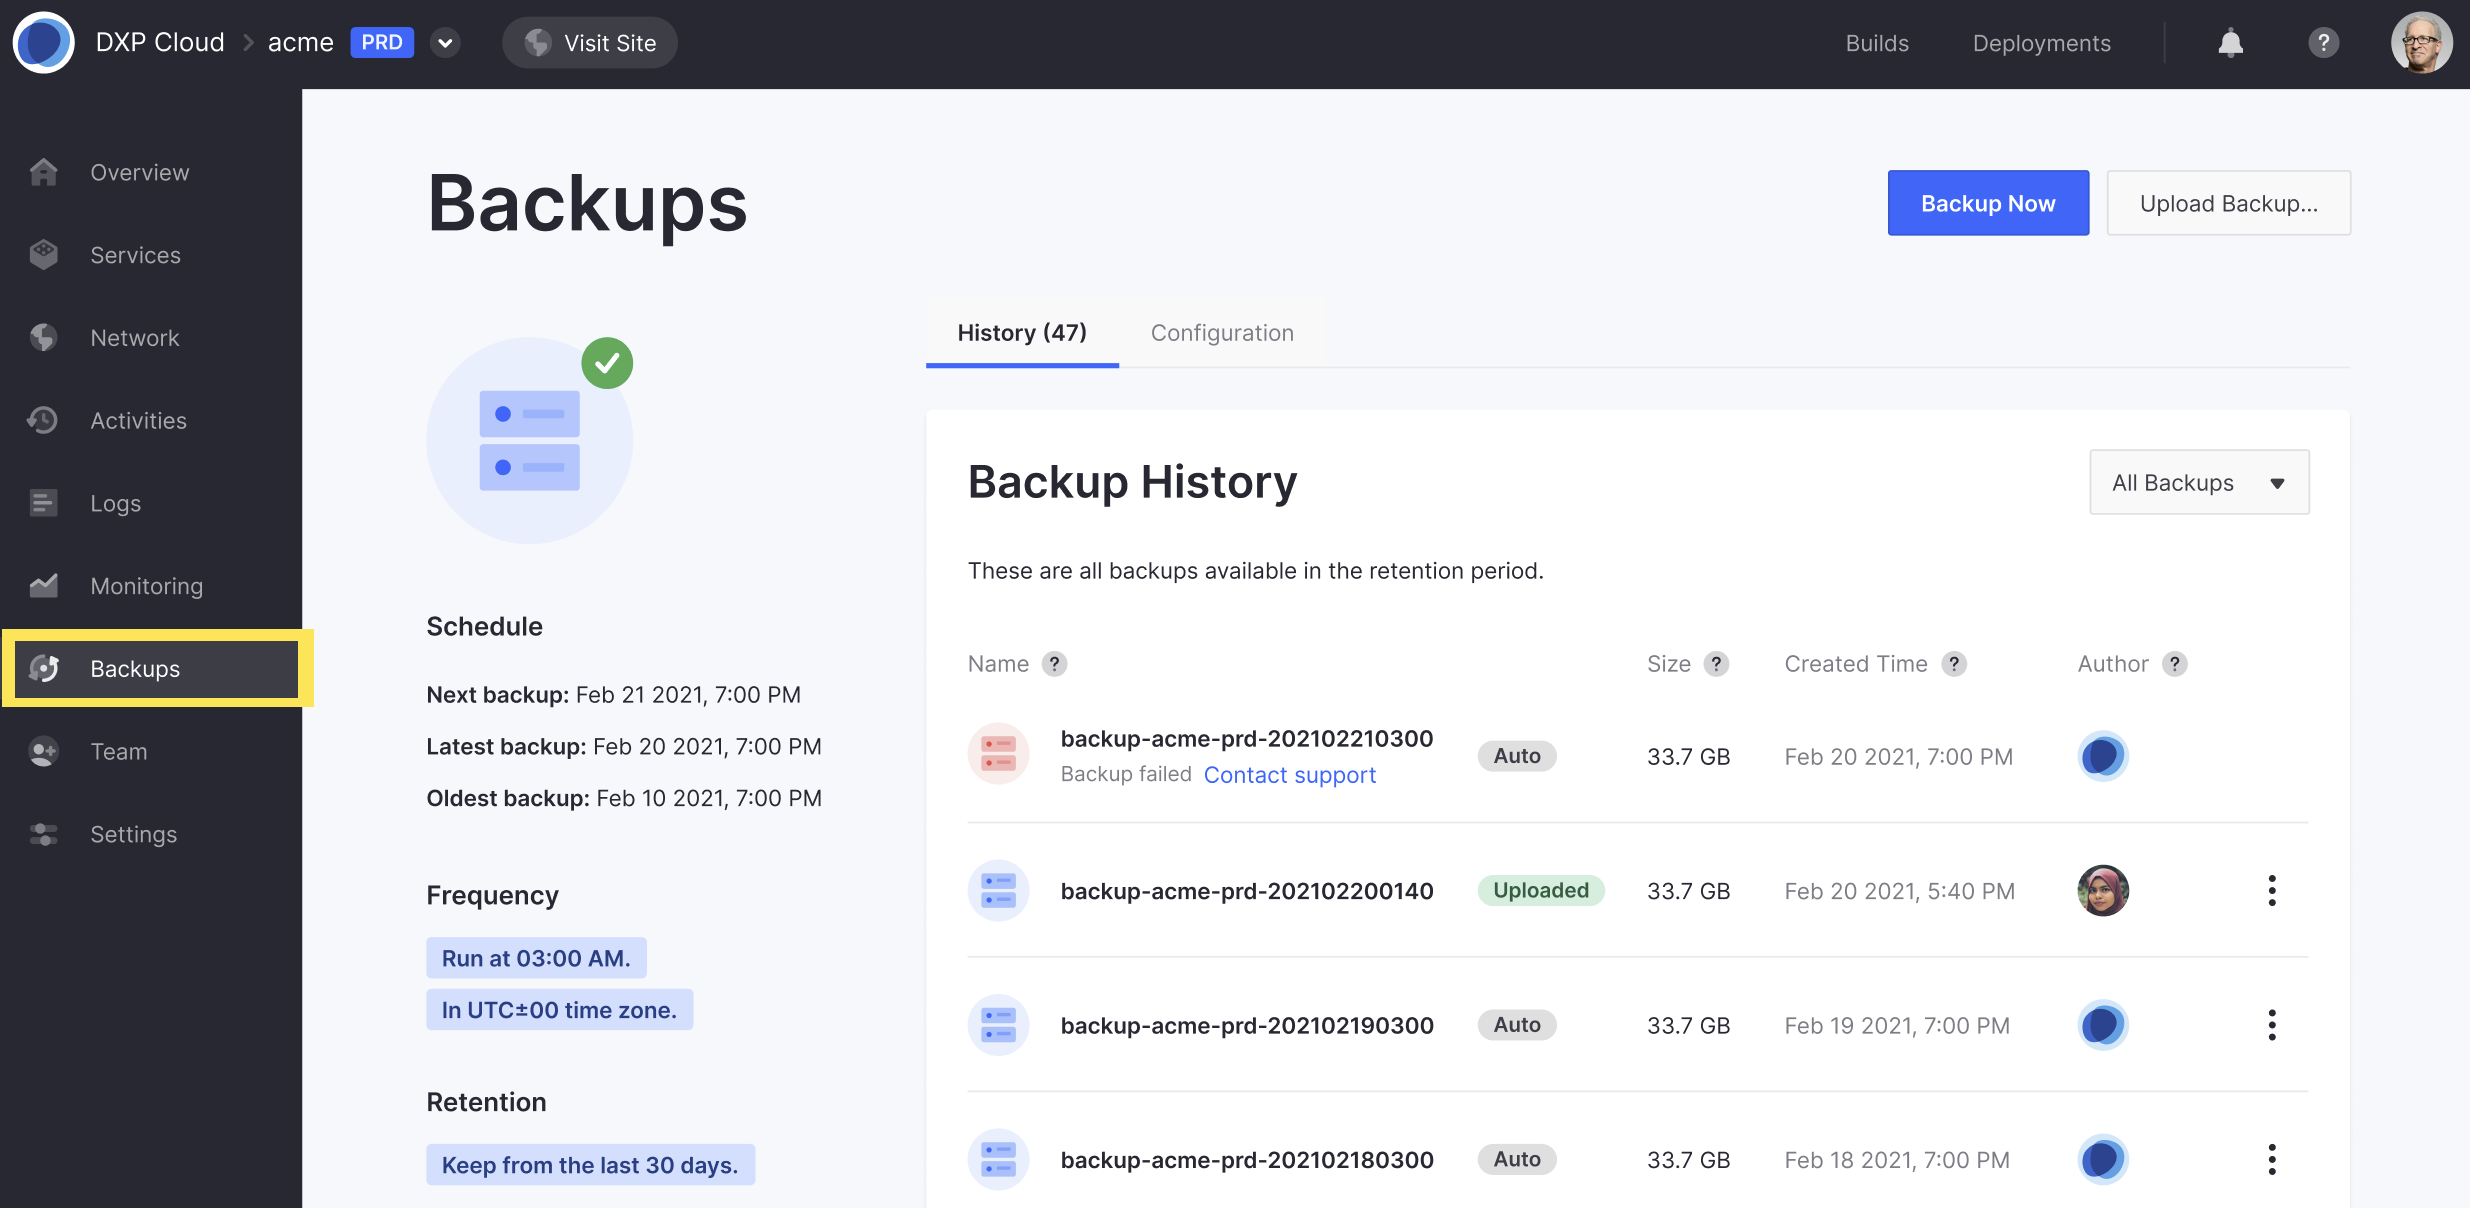 View backup history, create manual backups, and more from the Backups page in any environment.